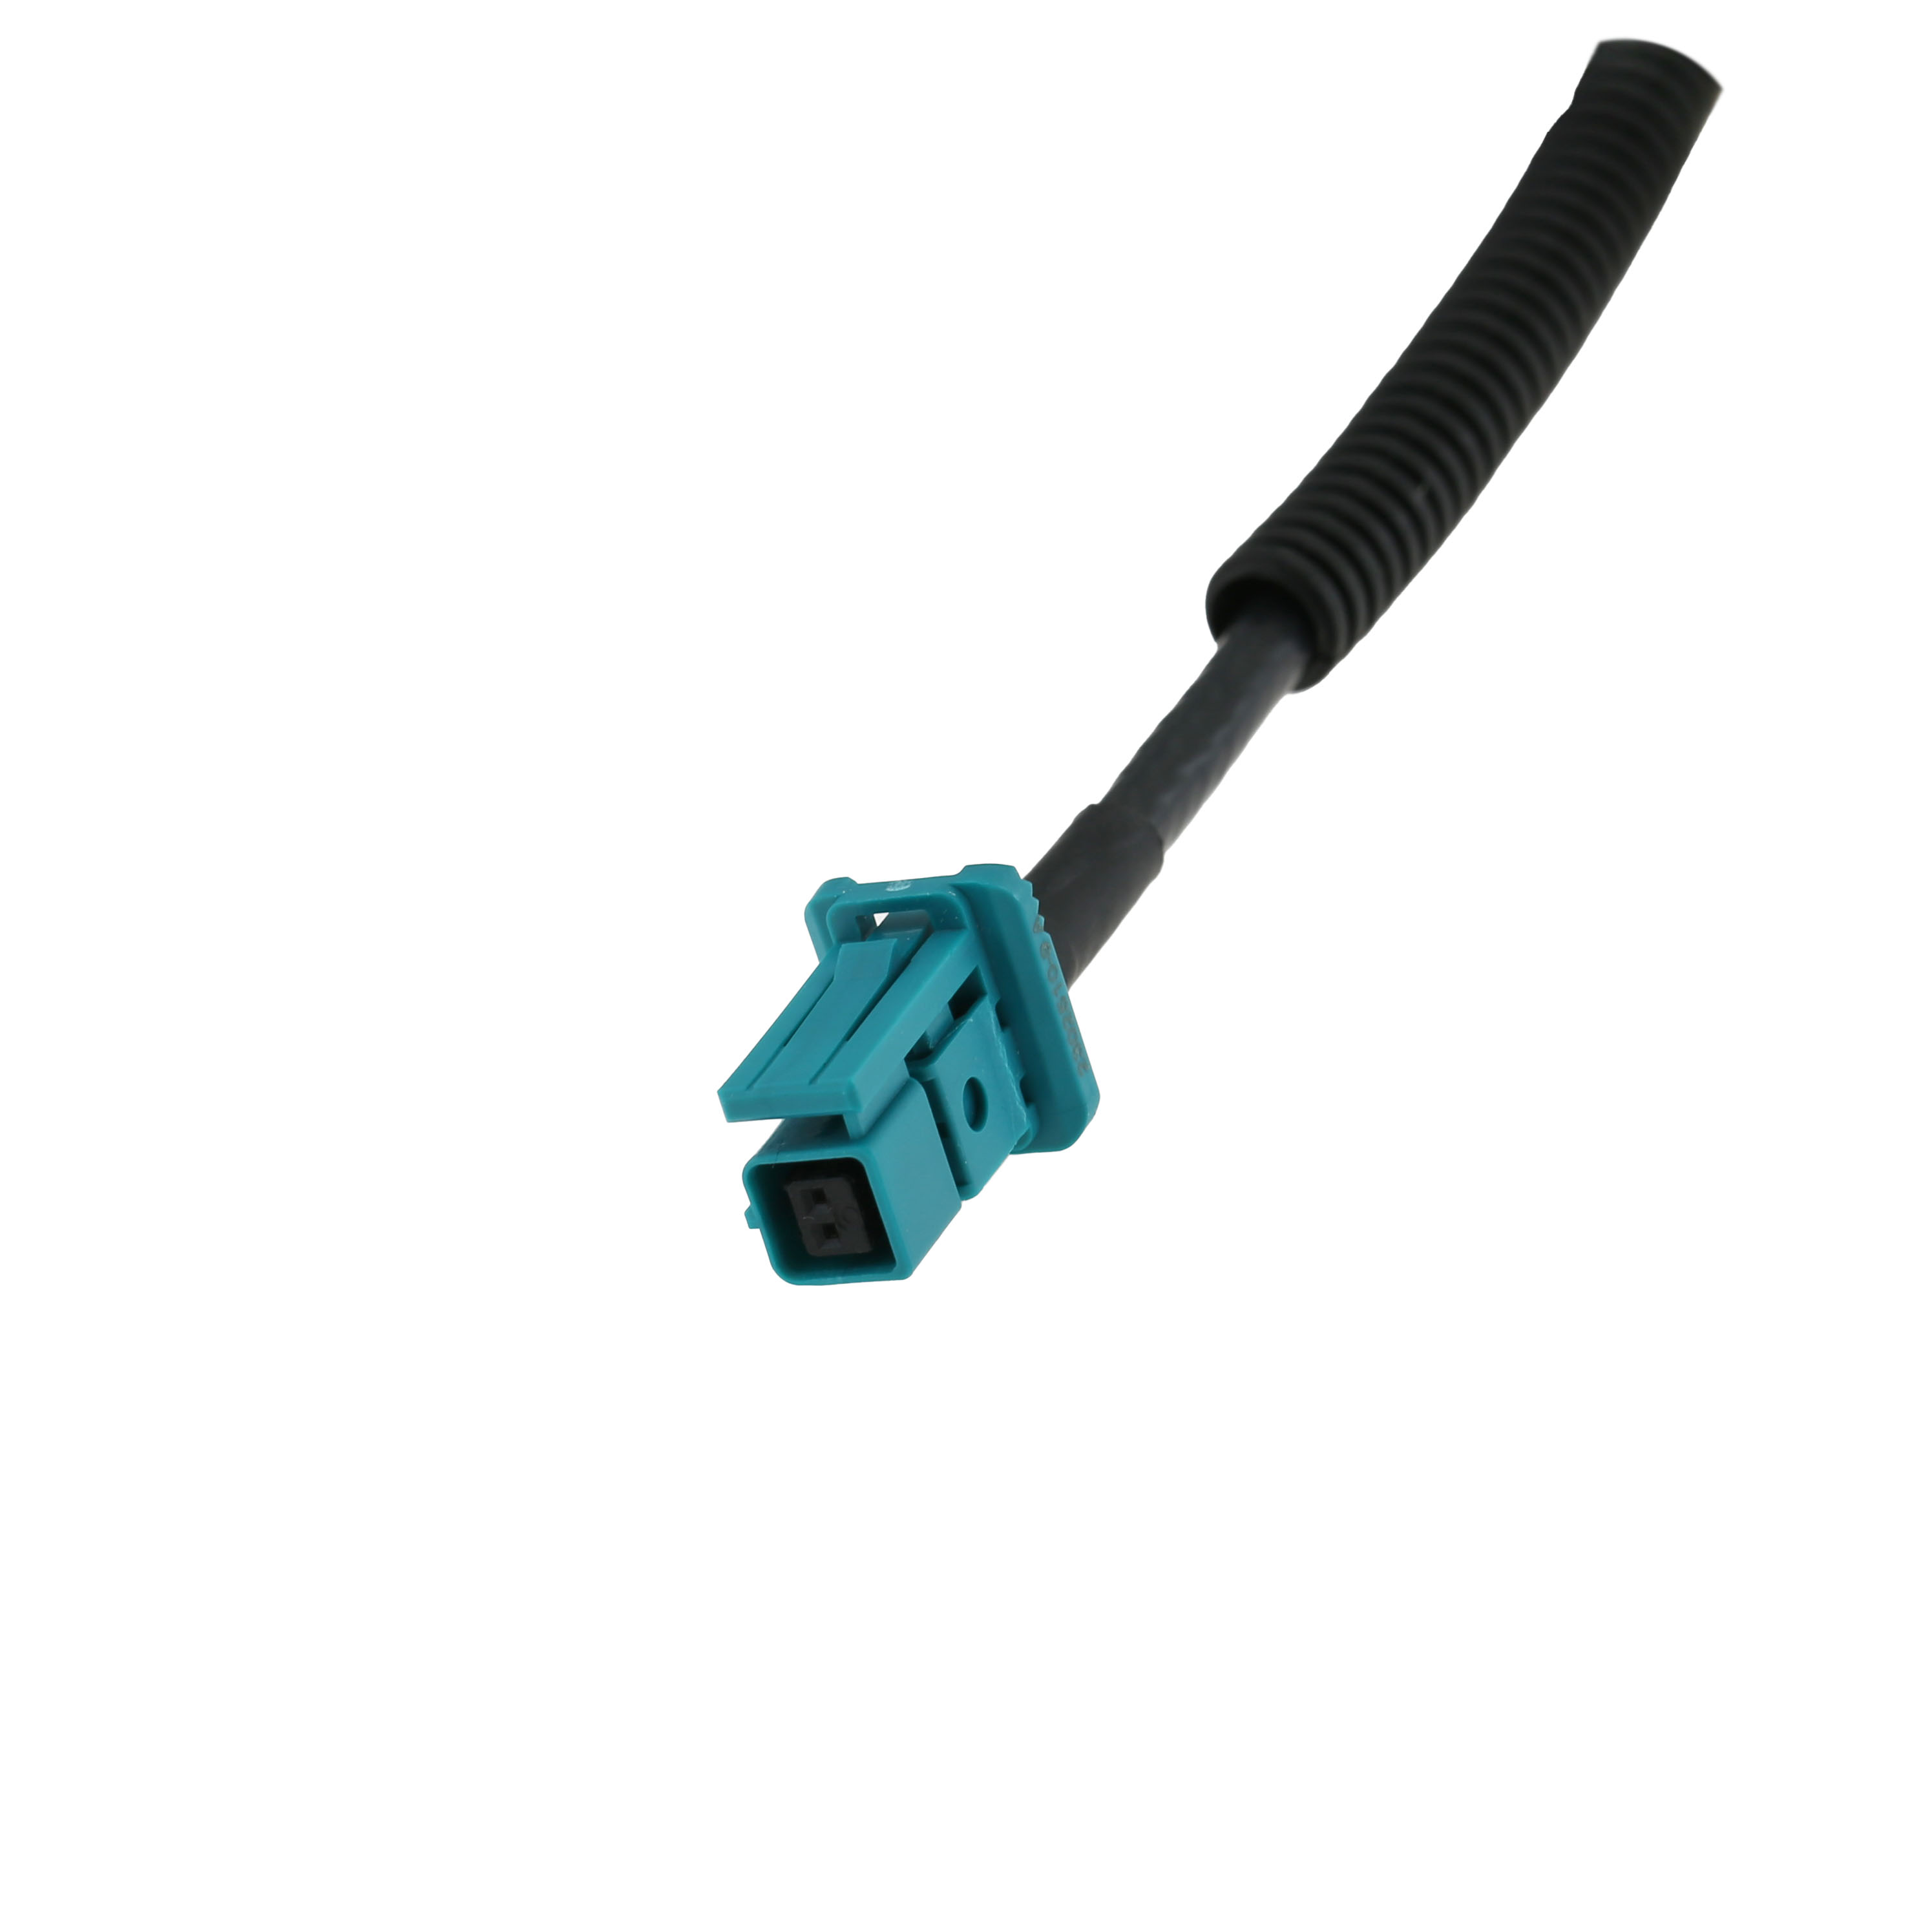 H-MTD To MATEnet Ethernet Cable Assemblies